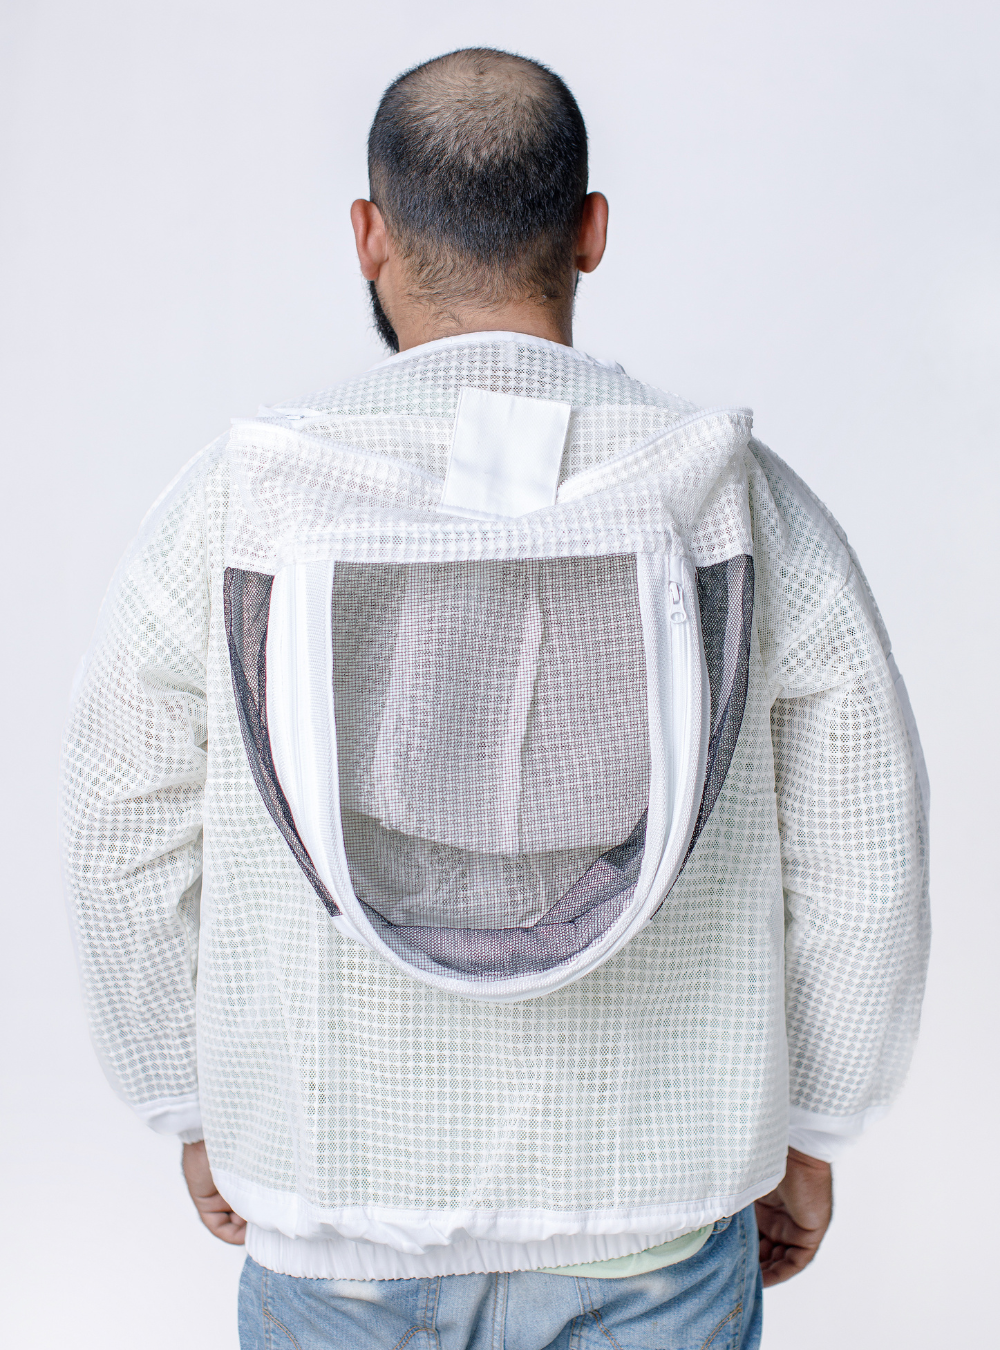 A 3 layer ventilated 'BeeAir White Jacket' for beekeeping, complete with detachable Fencing Veil Back Look